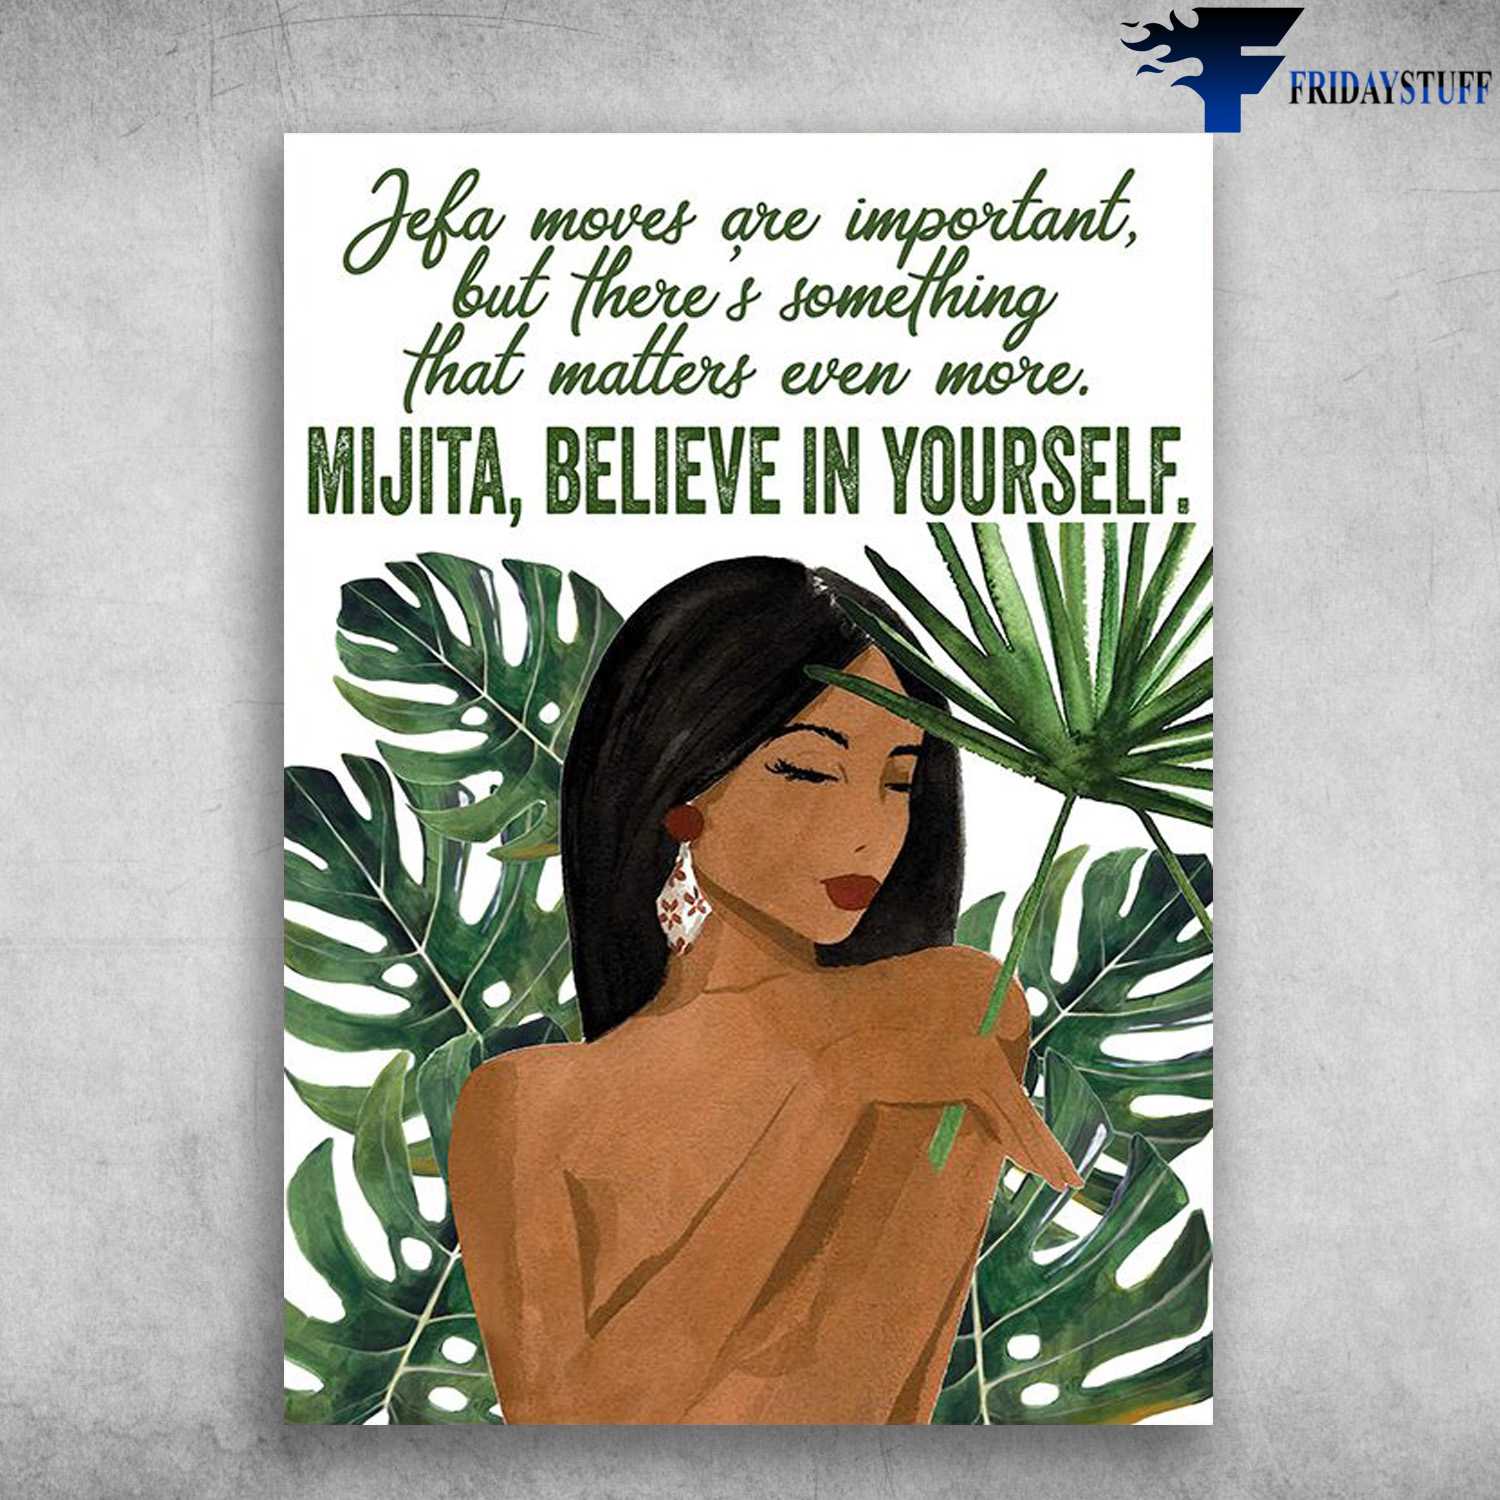 Beautiful Girl - Jefa Moves Are Important, But There's Something That Matters Even More, Mijira, Believe In Yourself